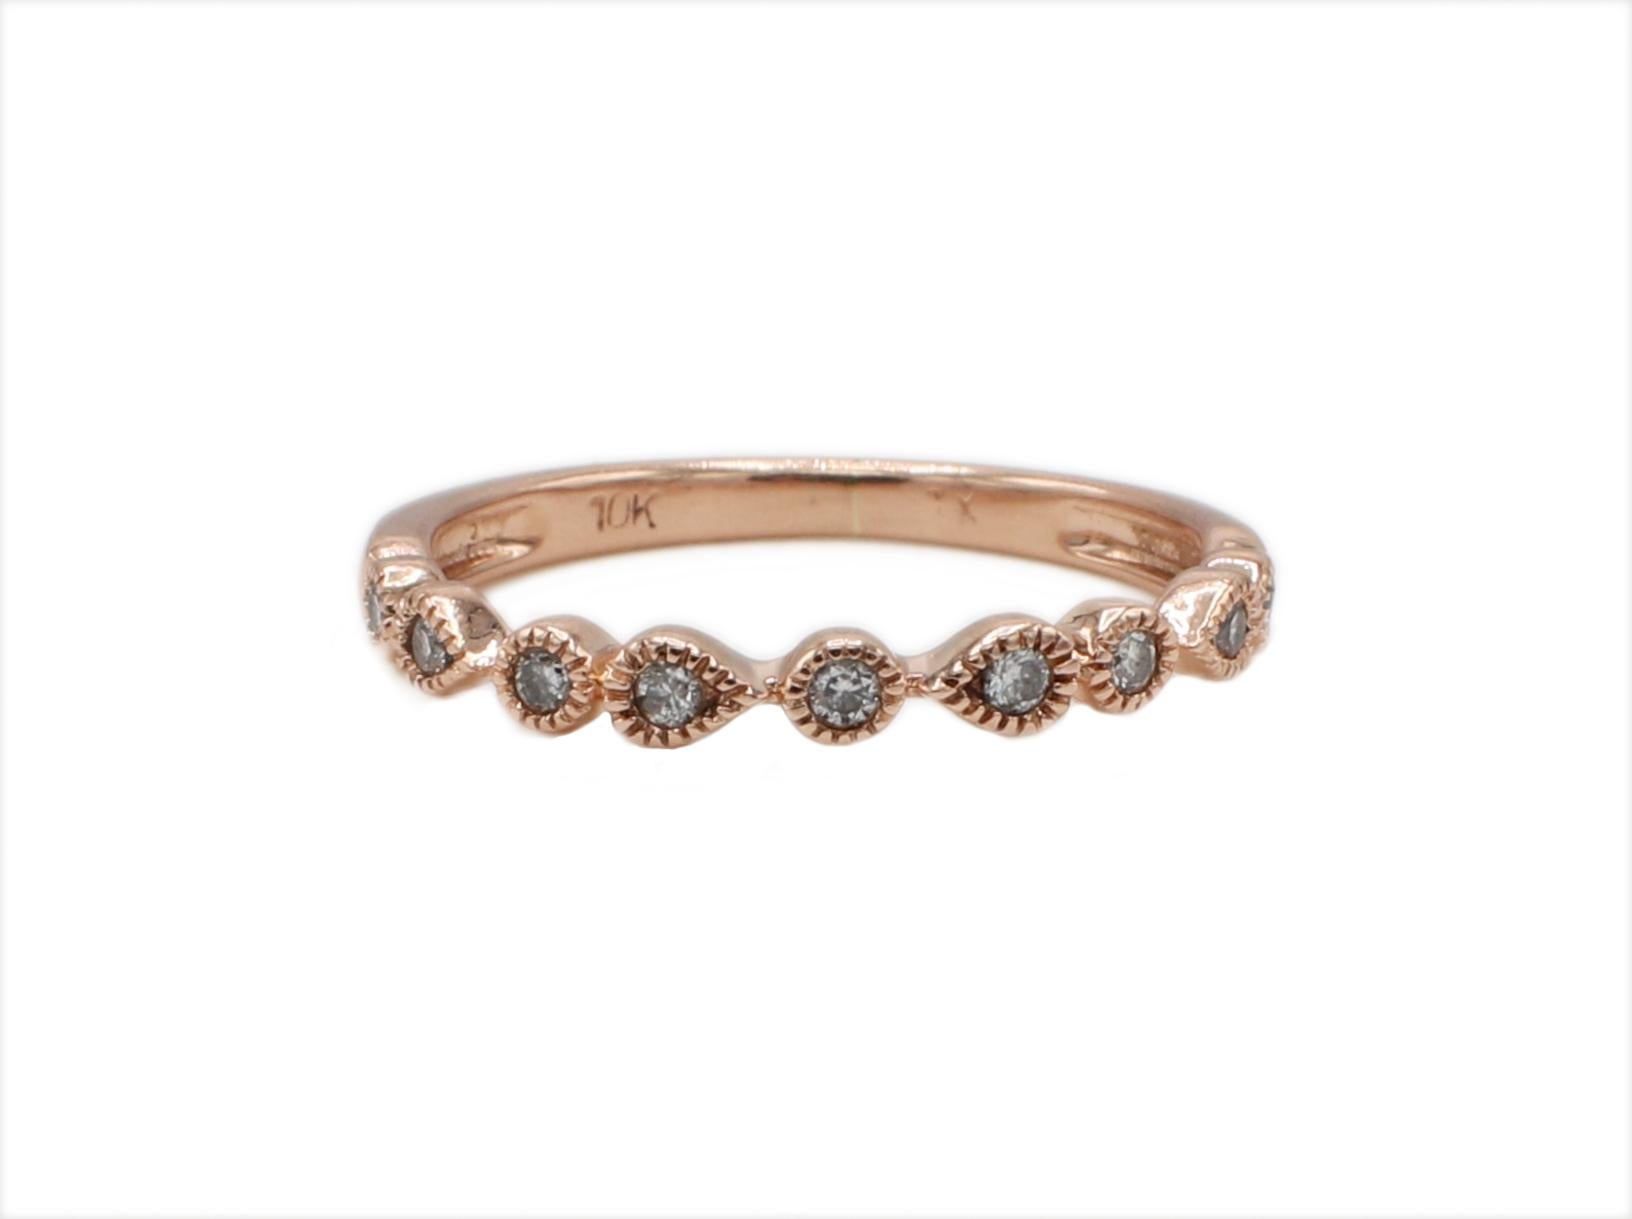 Rose Gold .10 Carat Natural Diamond Stackable Band Ring Size 5
Metal: 10K rose/pink gold
Weight: 1.31 grams 
Diamonds: Approx. .10 CTW I VS-SI natural diamonds
Size: 5 (US)
Band is 1.7 - 2.3MM
